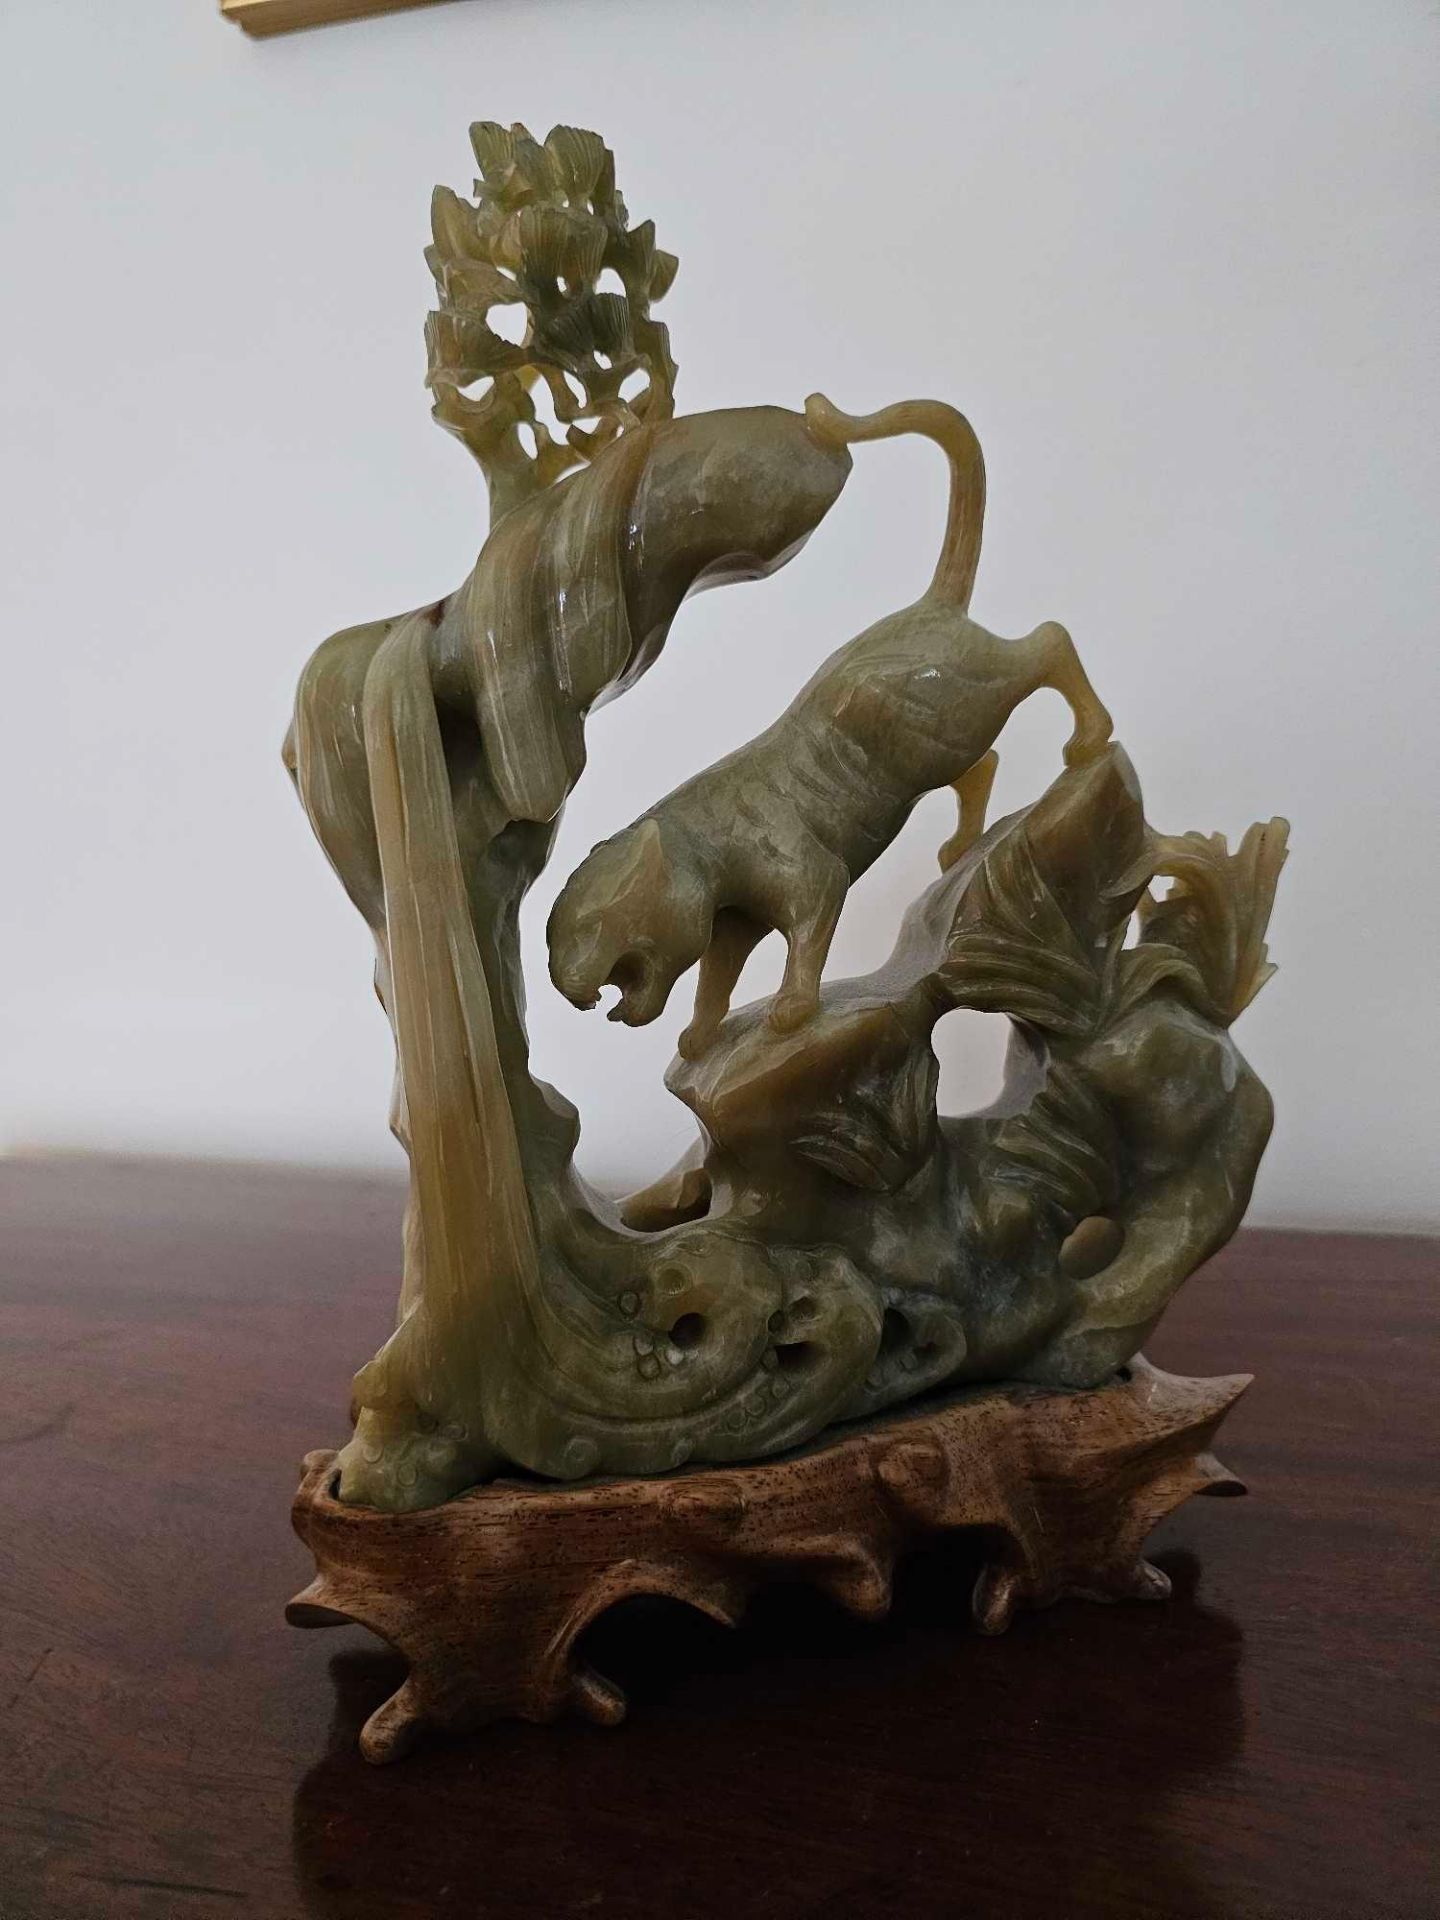 A Bowenite Or Nephrite (Serpentine) Which Is Often Called "New Jade" Figure Of A Tiger Beside A - Image 2 of 4